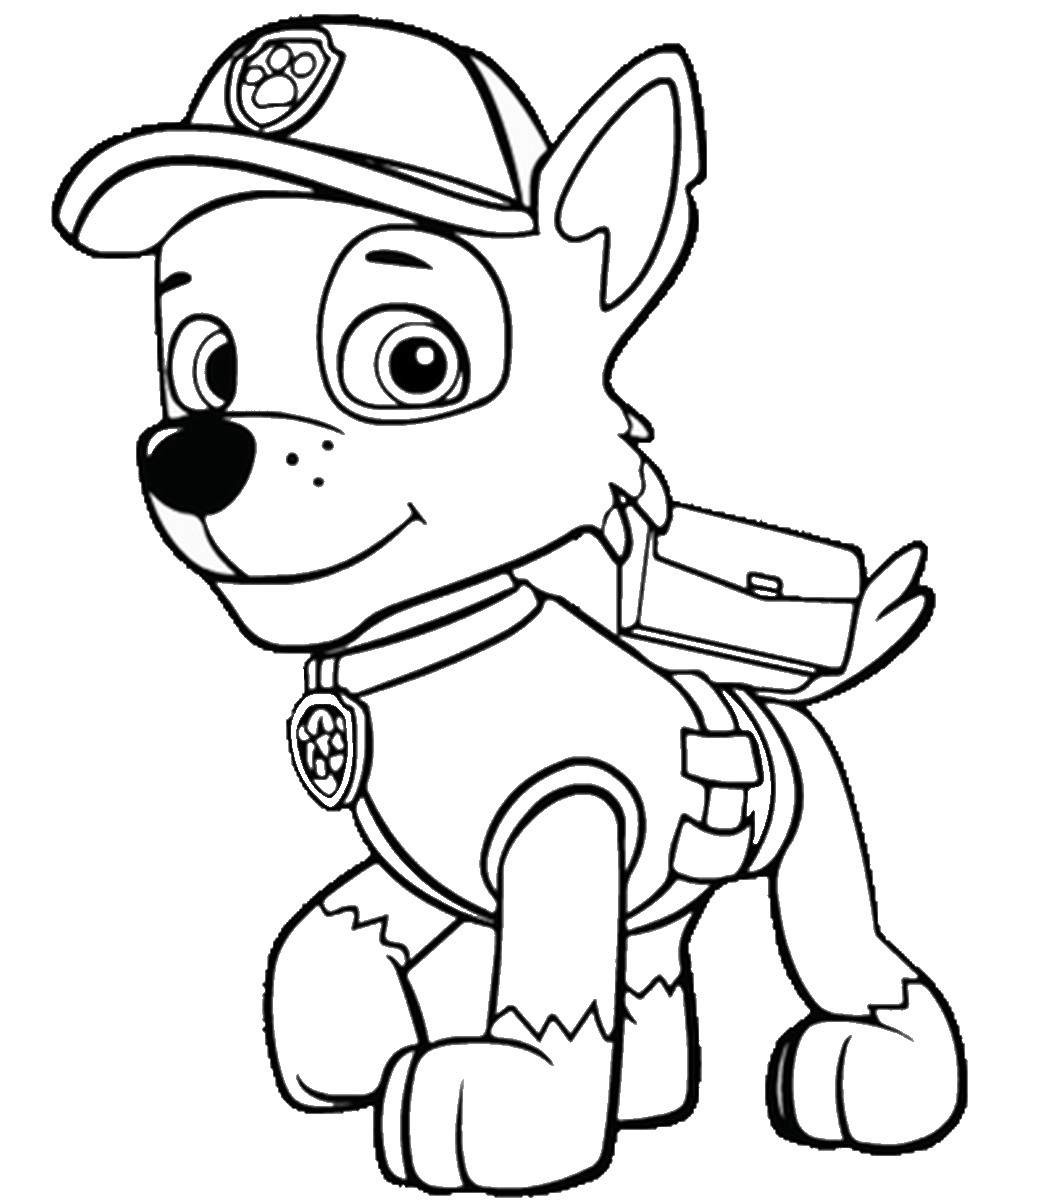 Kids Coloring Sheets
 Paw Patrol Coloring Pages Best Coloring Pages For Kids